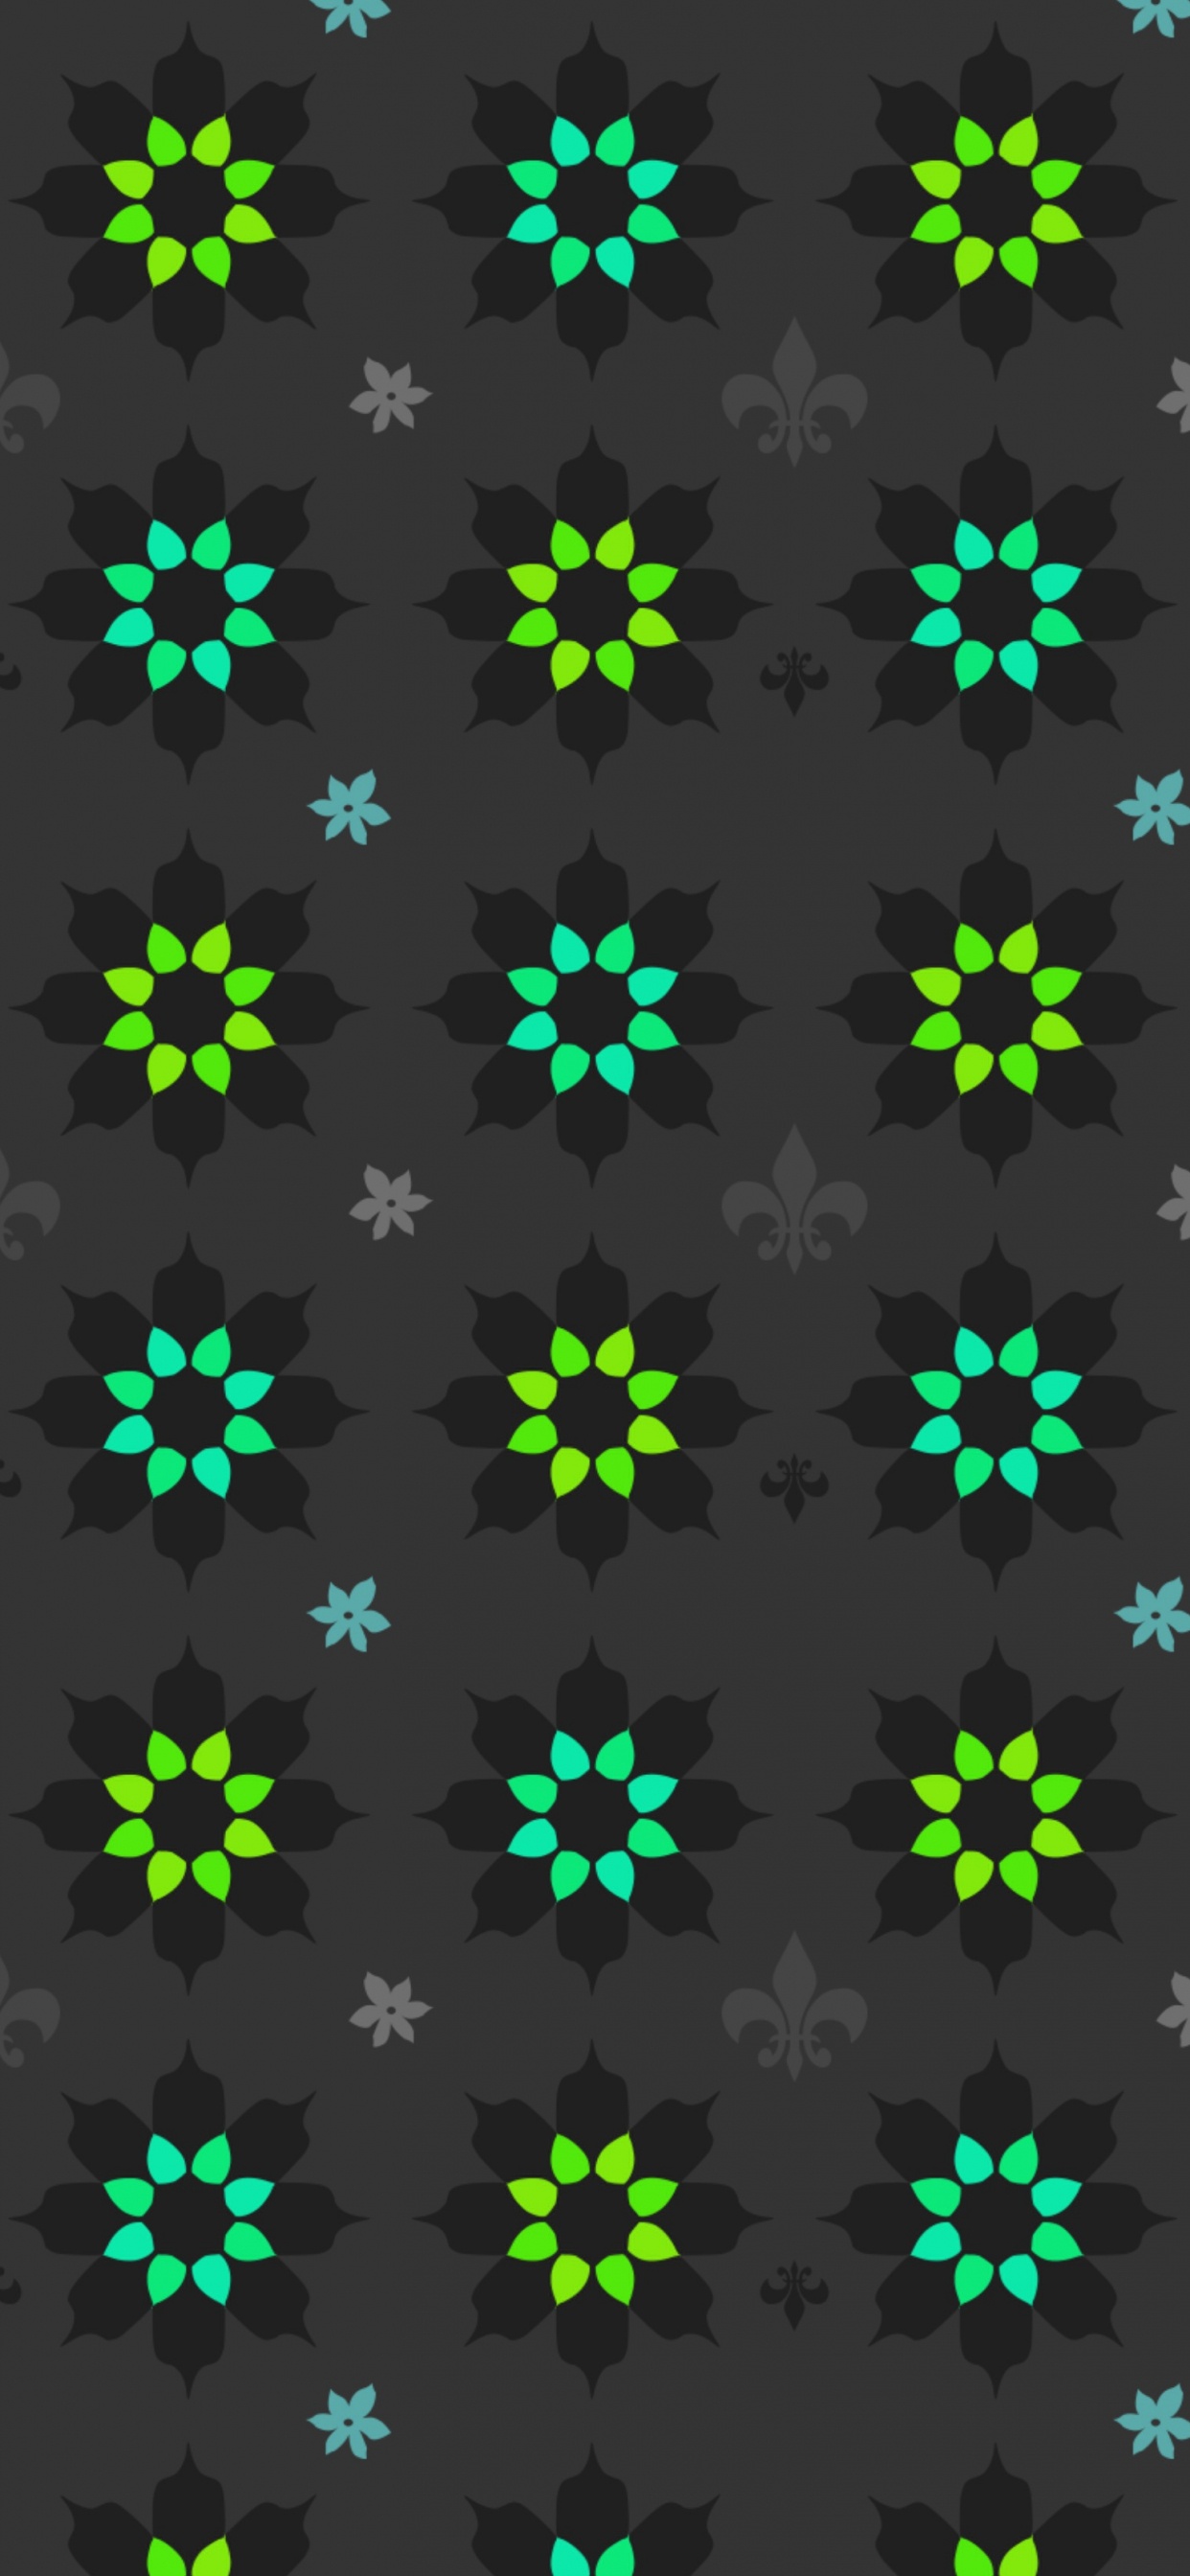 Black and White Star Print Textile. Wallpaper in 1242x2688 Resolution